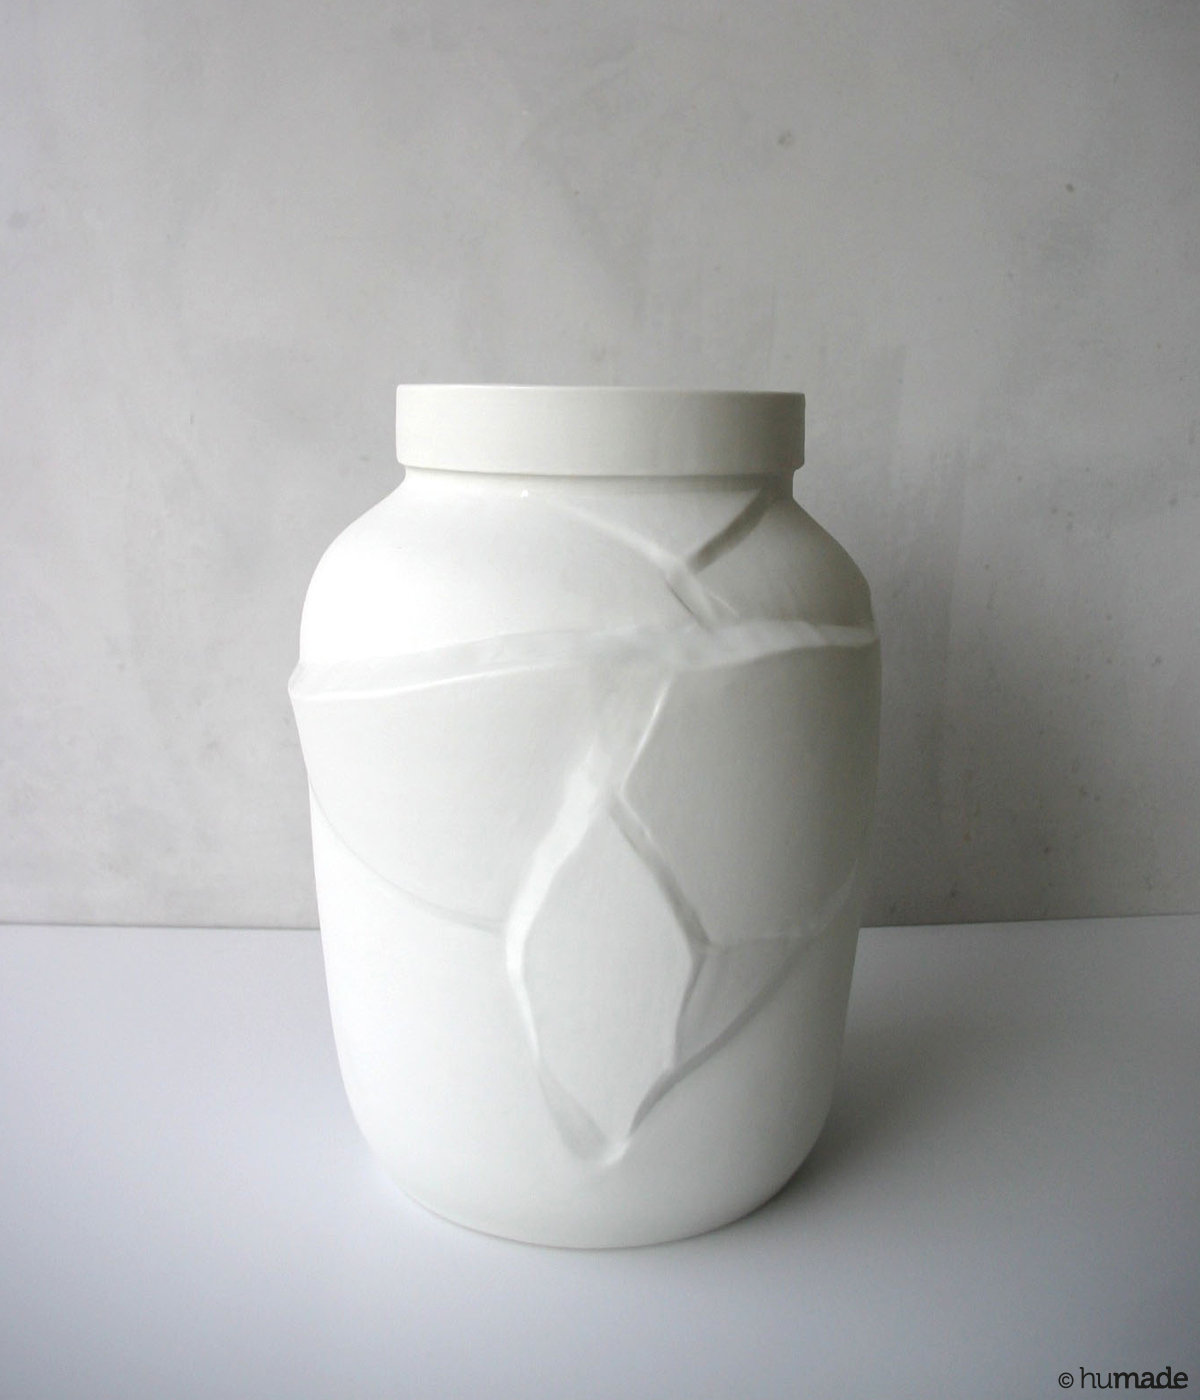 Tectonic vase / porcelain - The tectonic vase invites you to look at change differently.
Just like shifts in the earth&rsquo;s c...